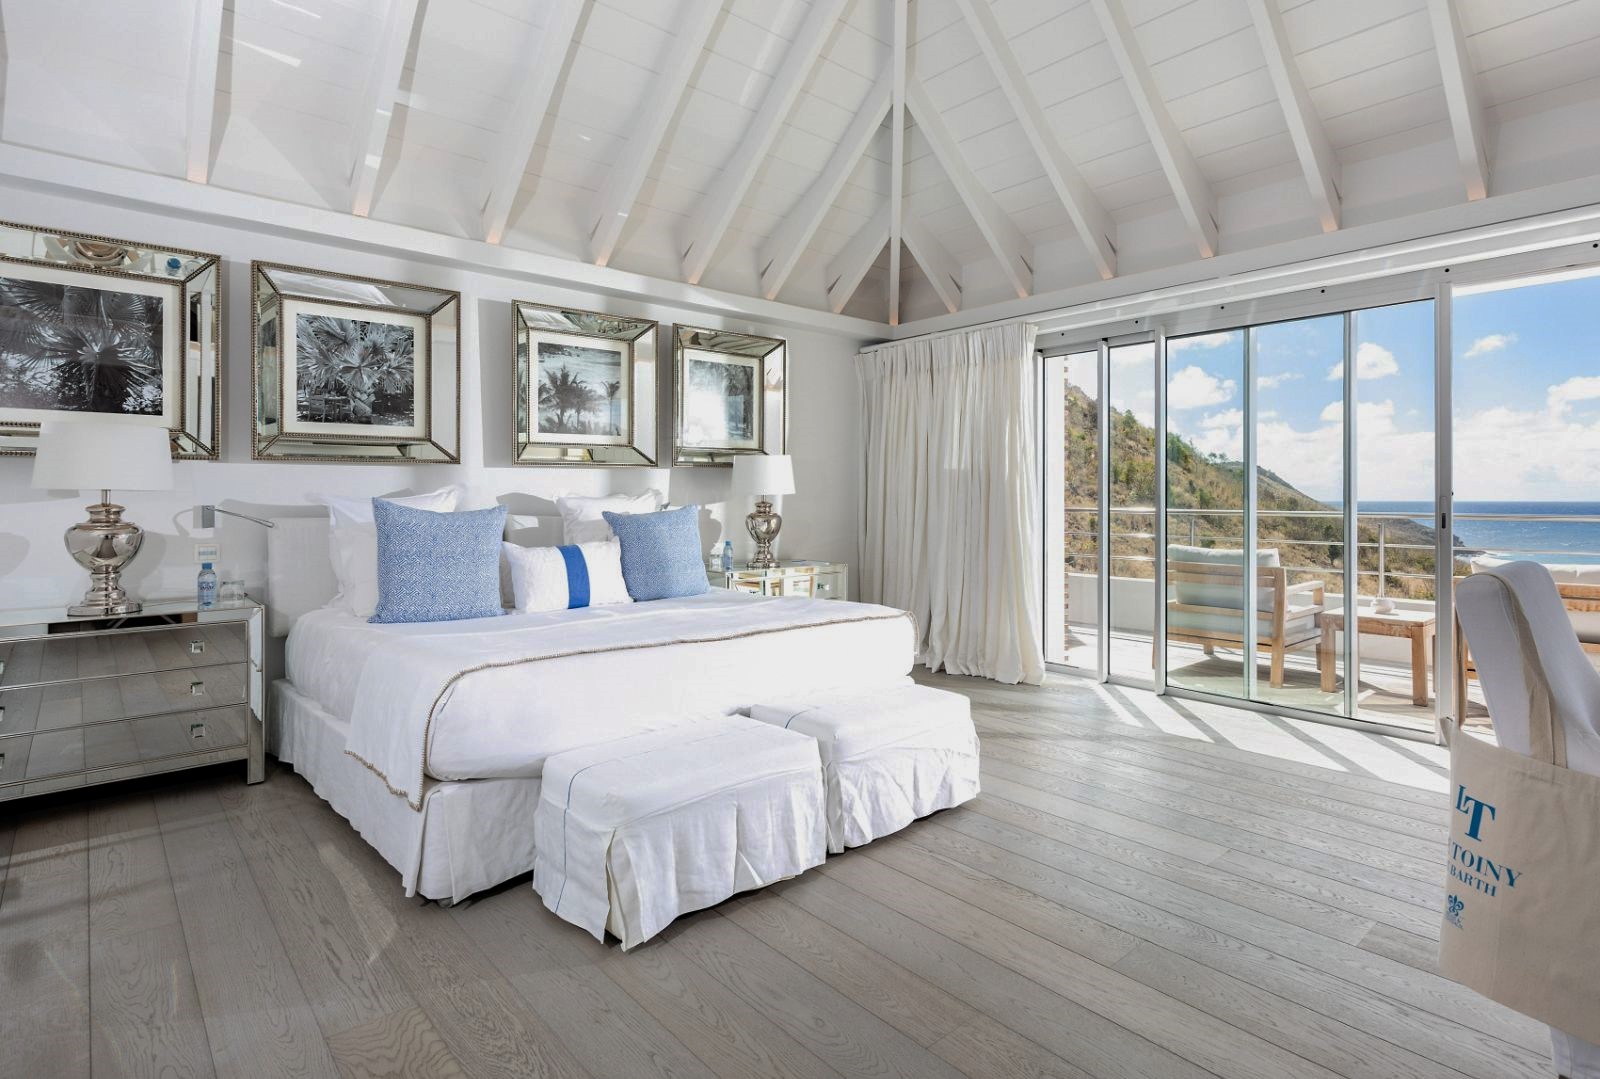 Duplex suite bedroom at Hotel Le Toiny in St Barths